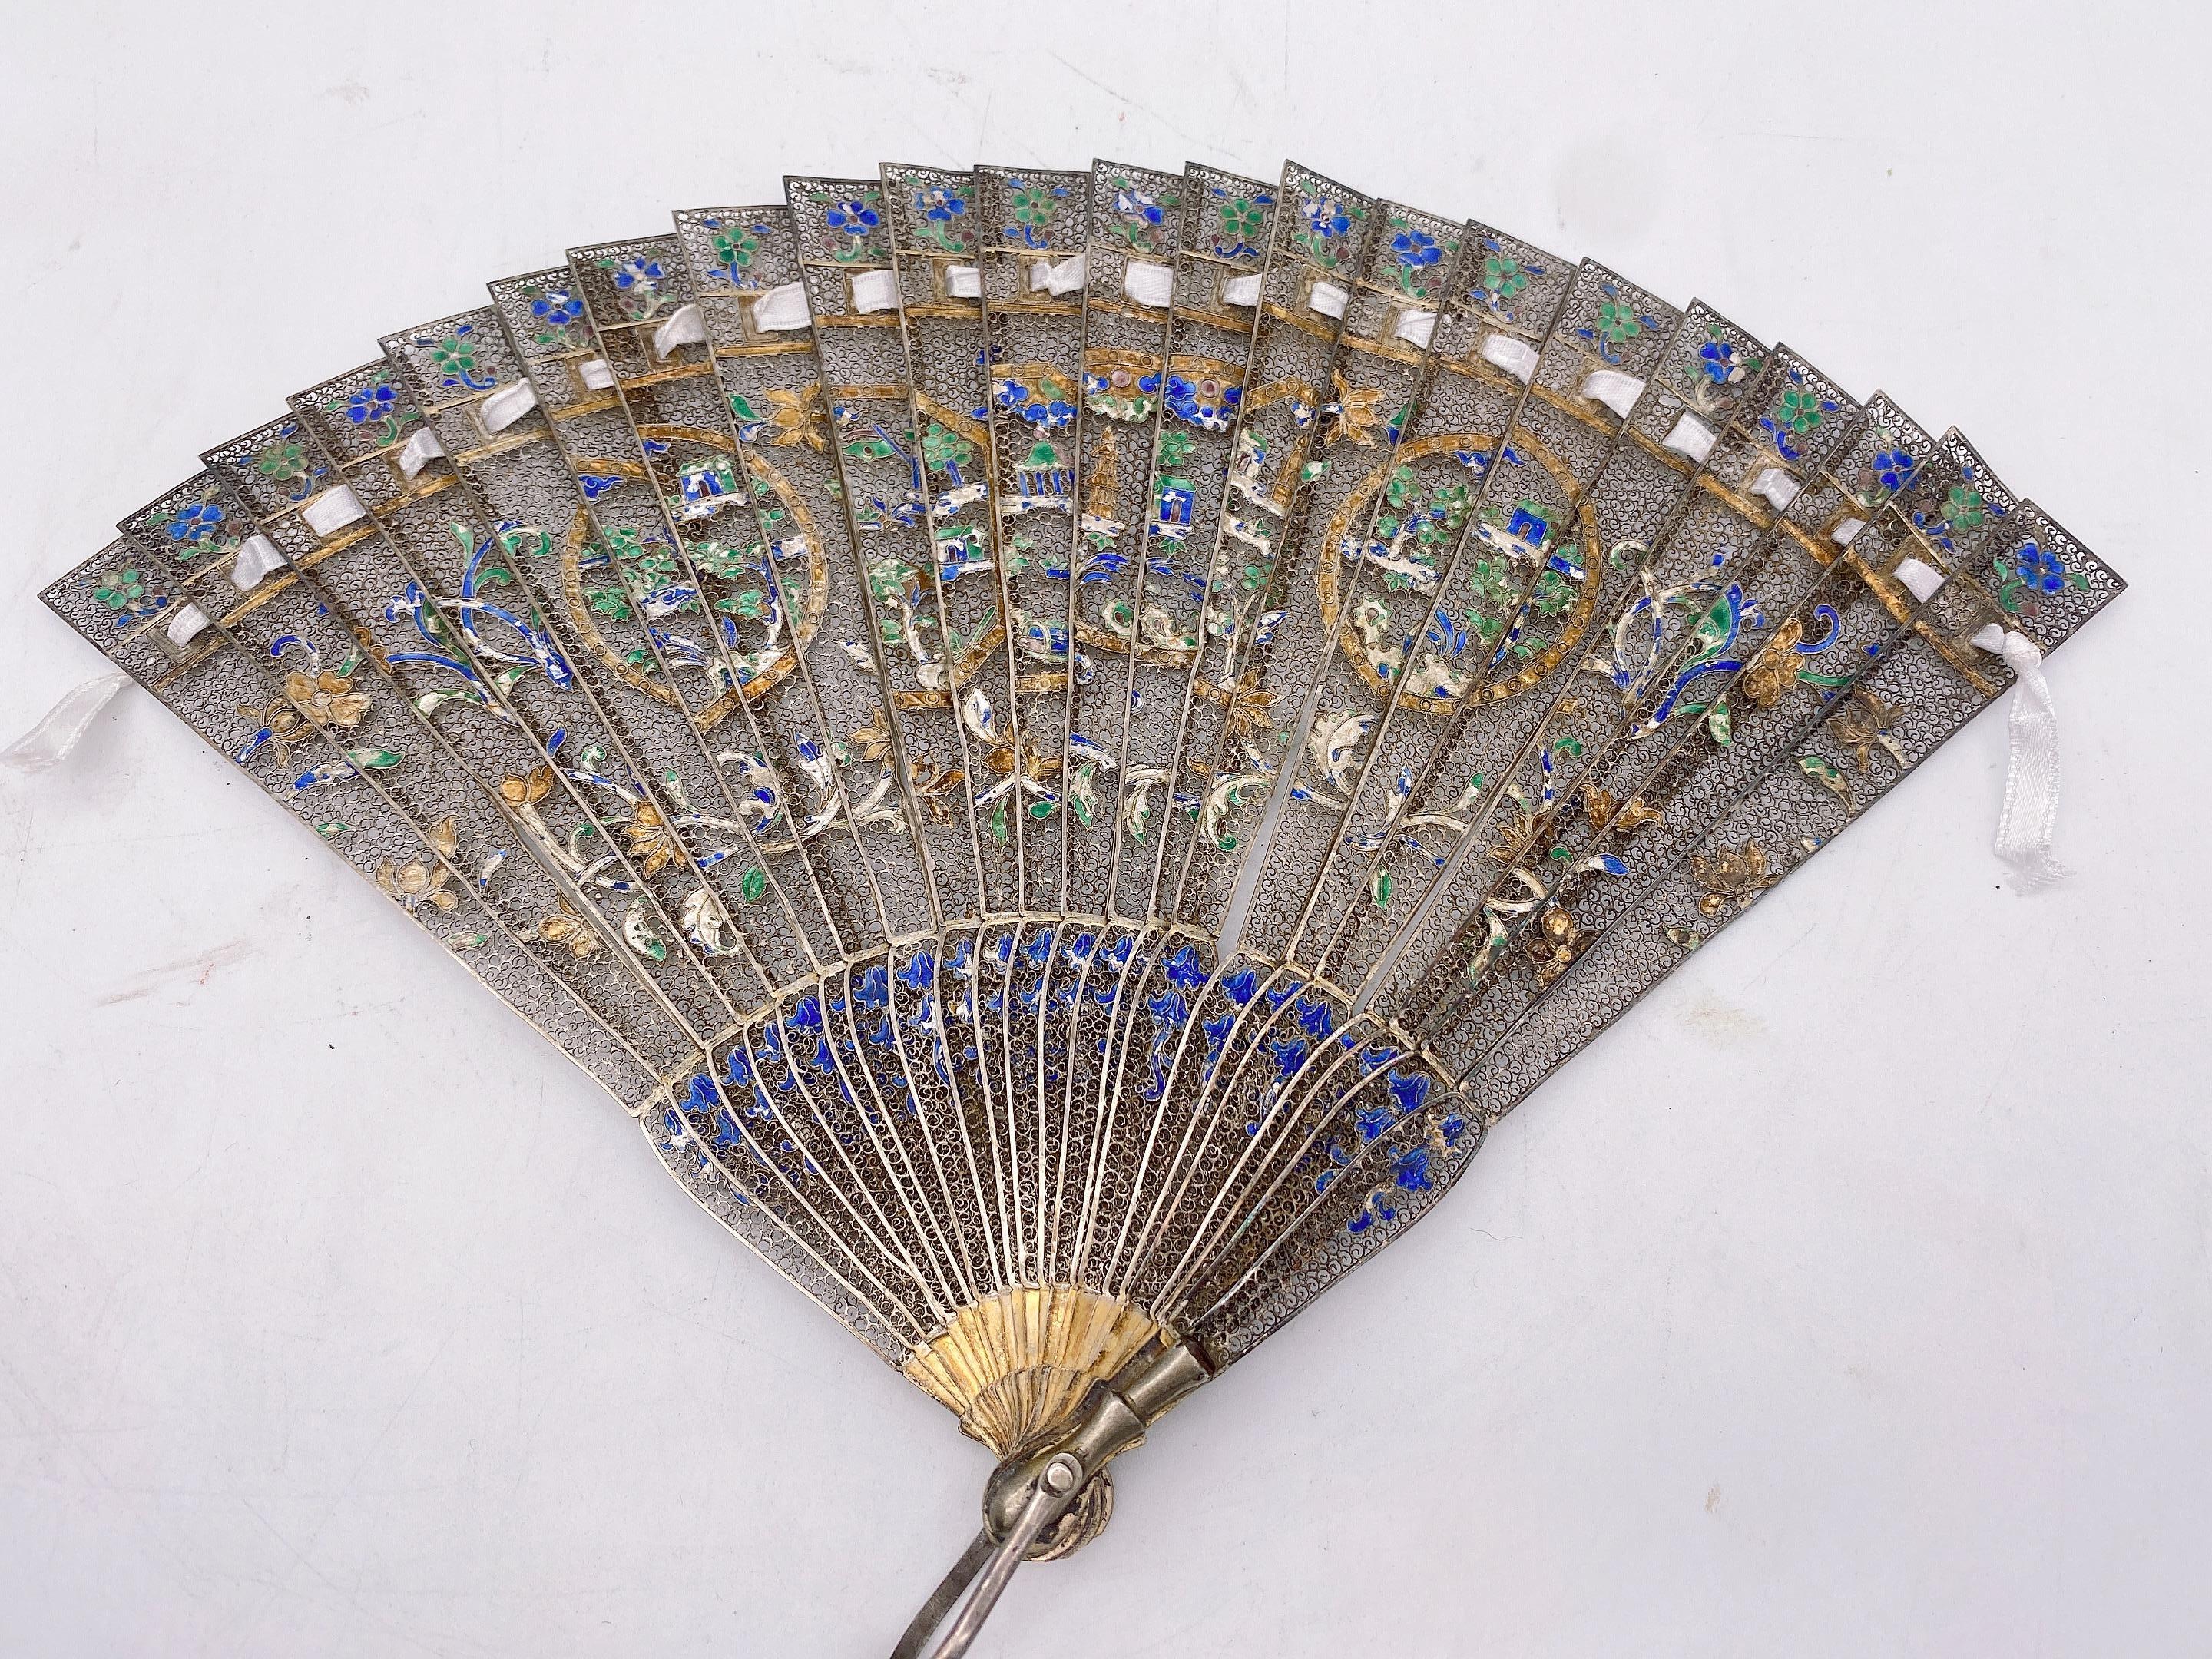 19th Century Rare Antique  Qing Dynasty Chinese Gilt Silver Filigree And Enamel Brise Fan For Sale